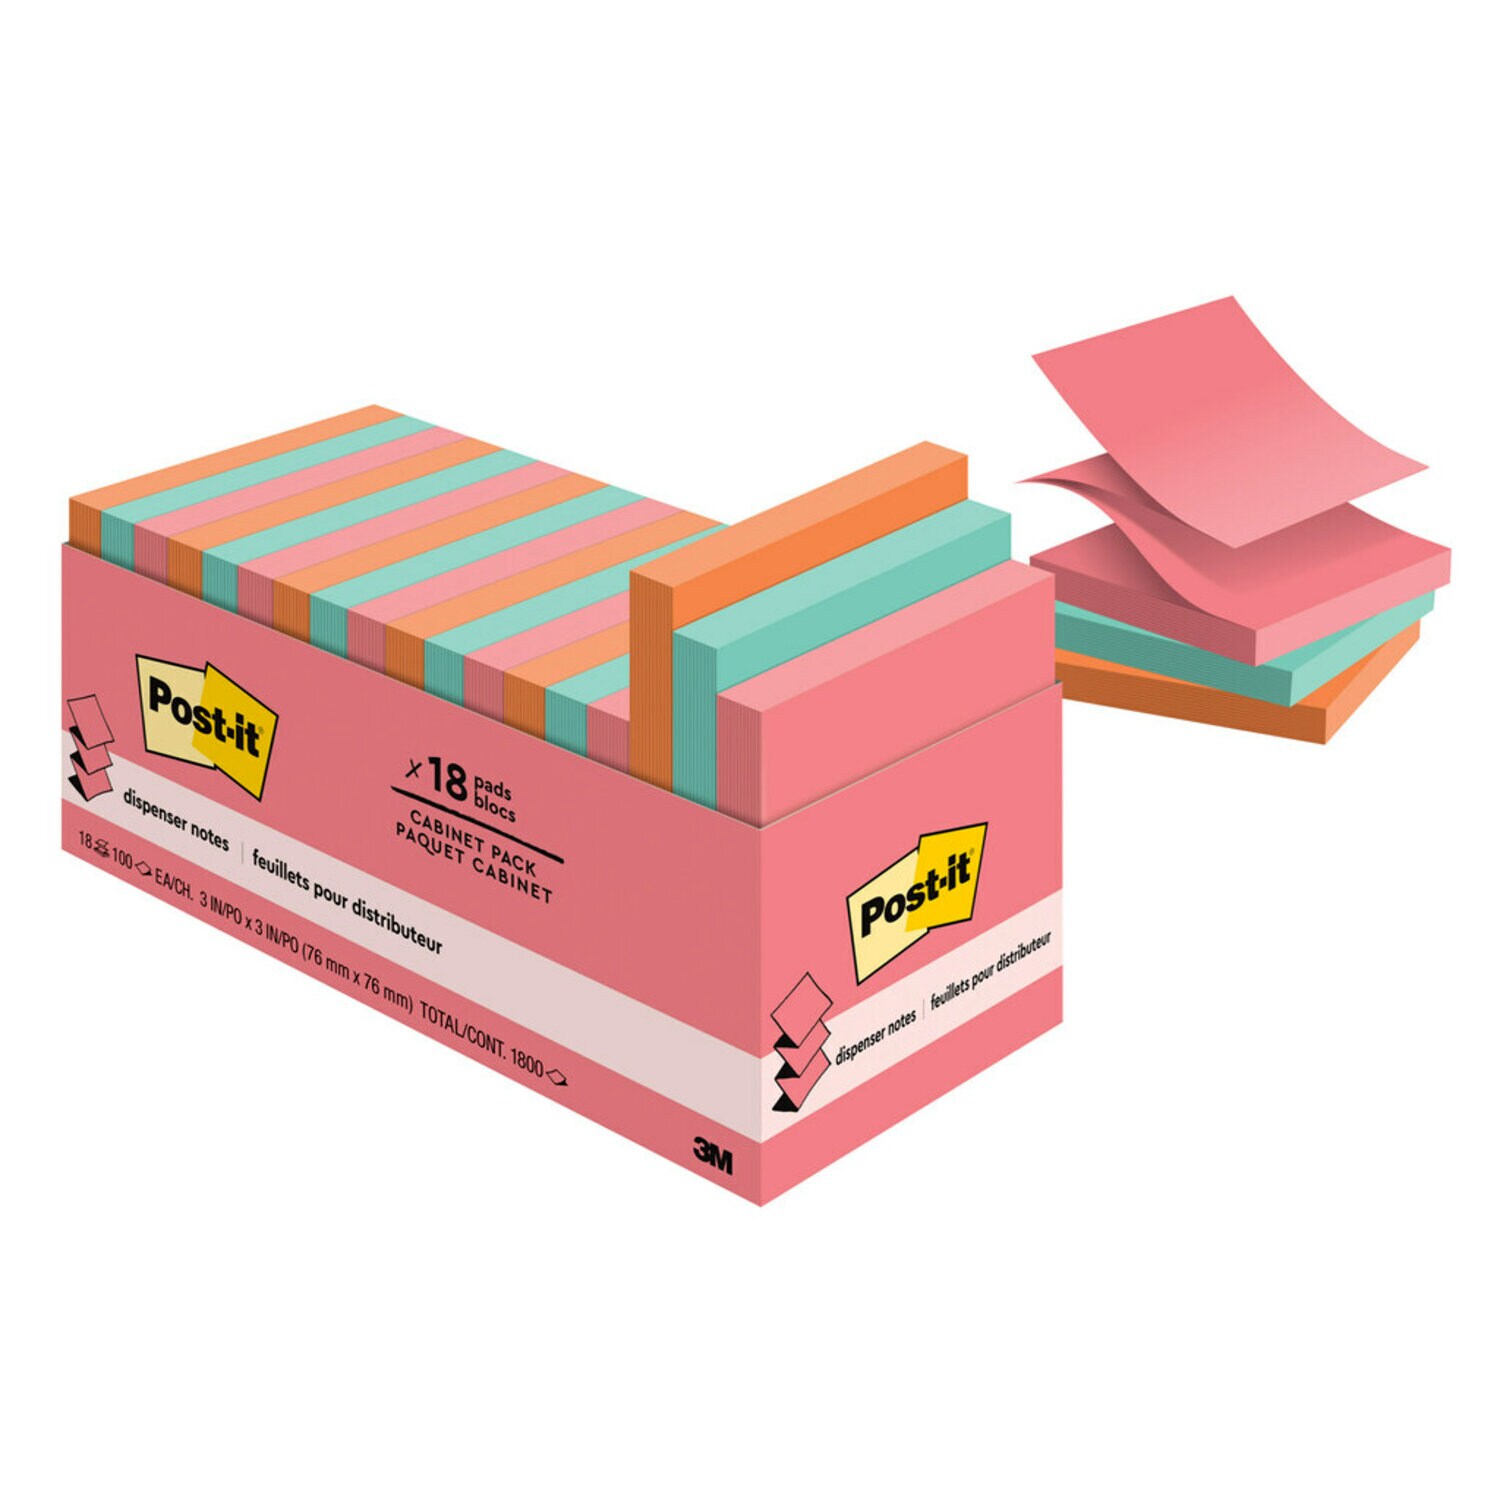 7010332970 - Post-it Dispenser Pop-up Notes R330-18CTCP, 3 in x 3 in (76 mm x 76 mm), Poptimistic Collection, 18 Pads/Pack, 100 Sheets/Pad